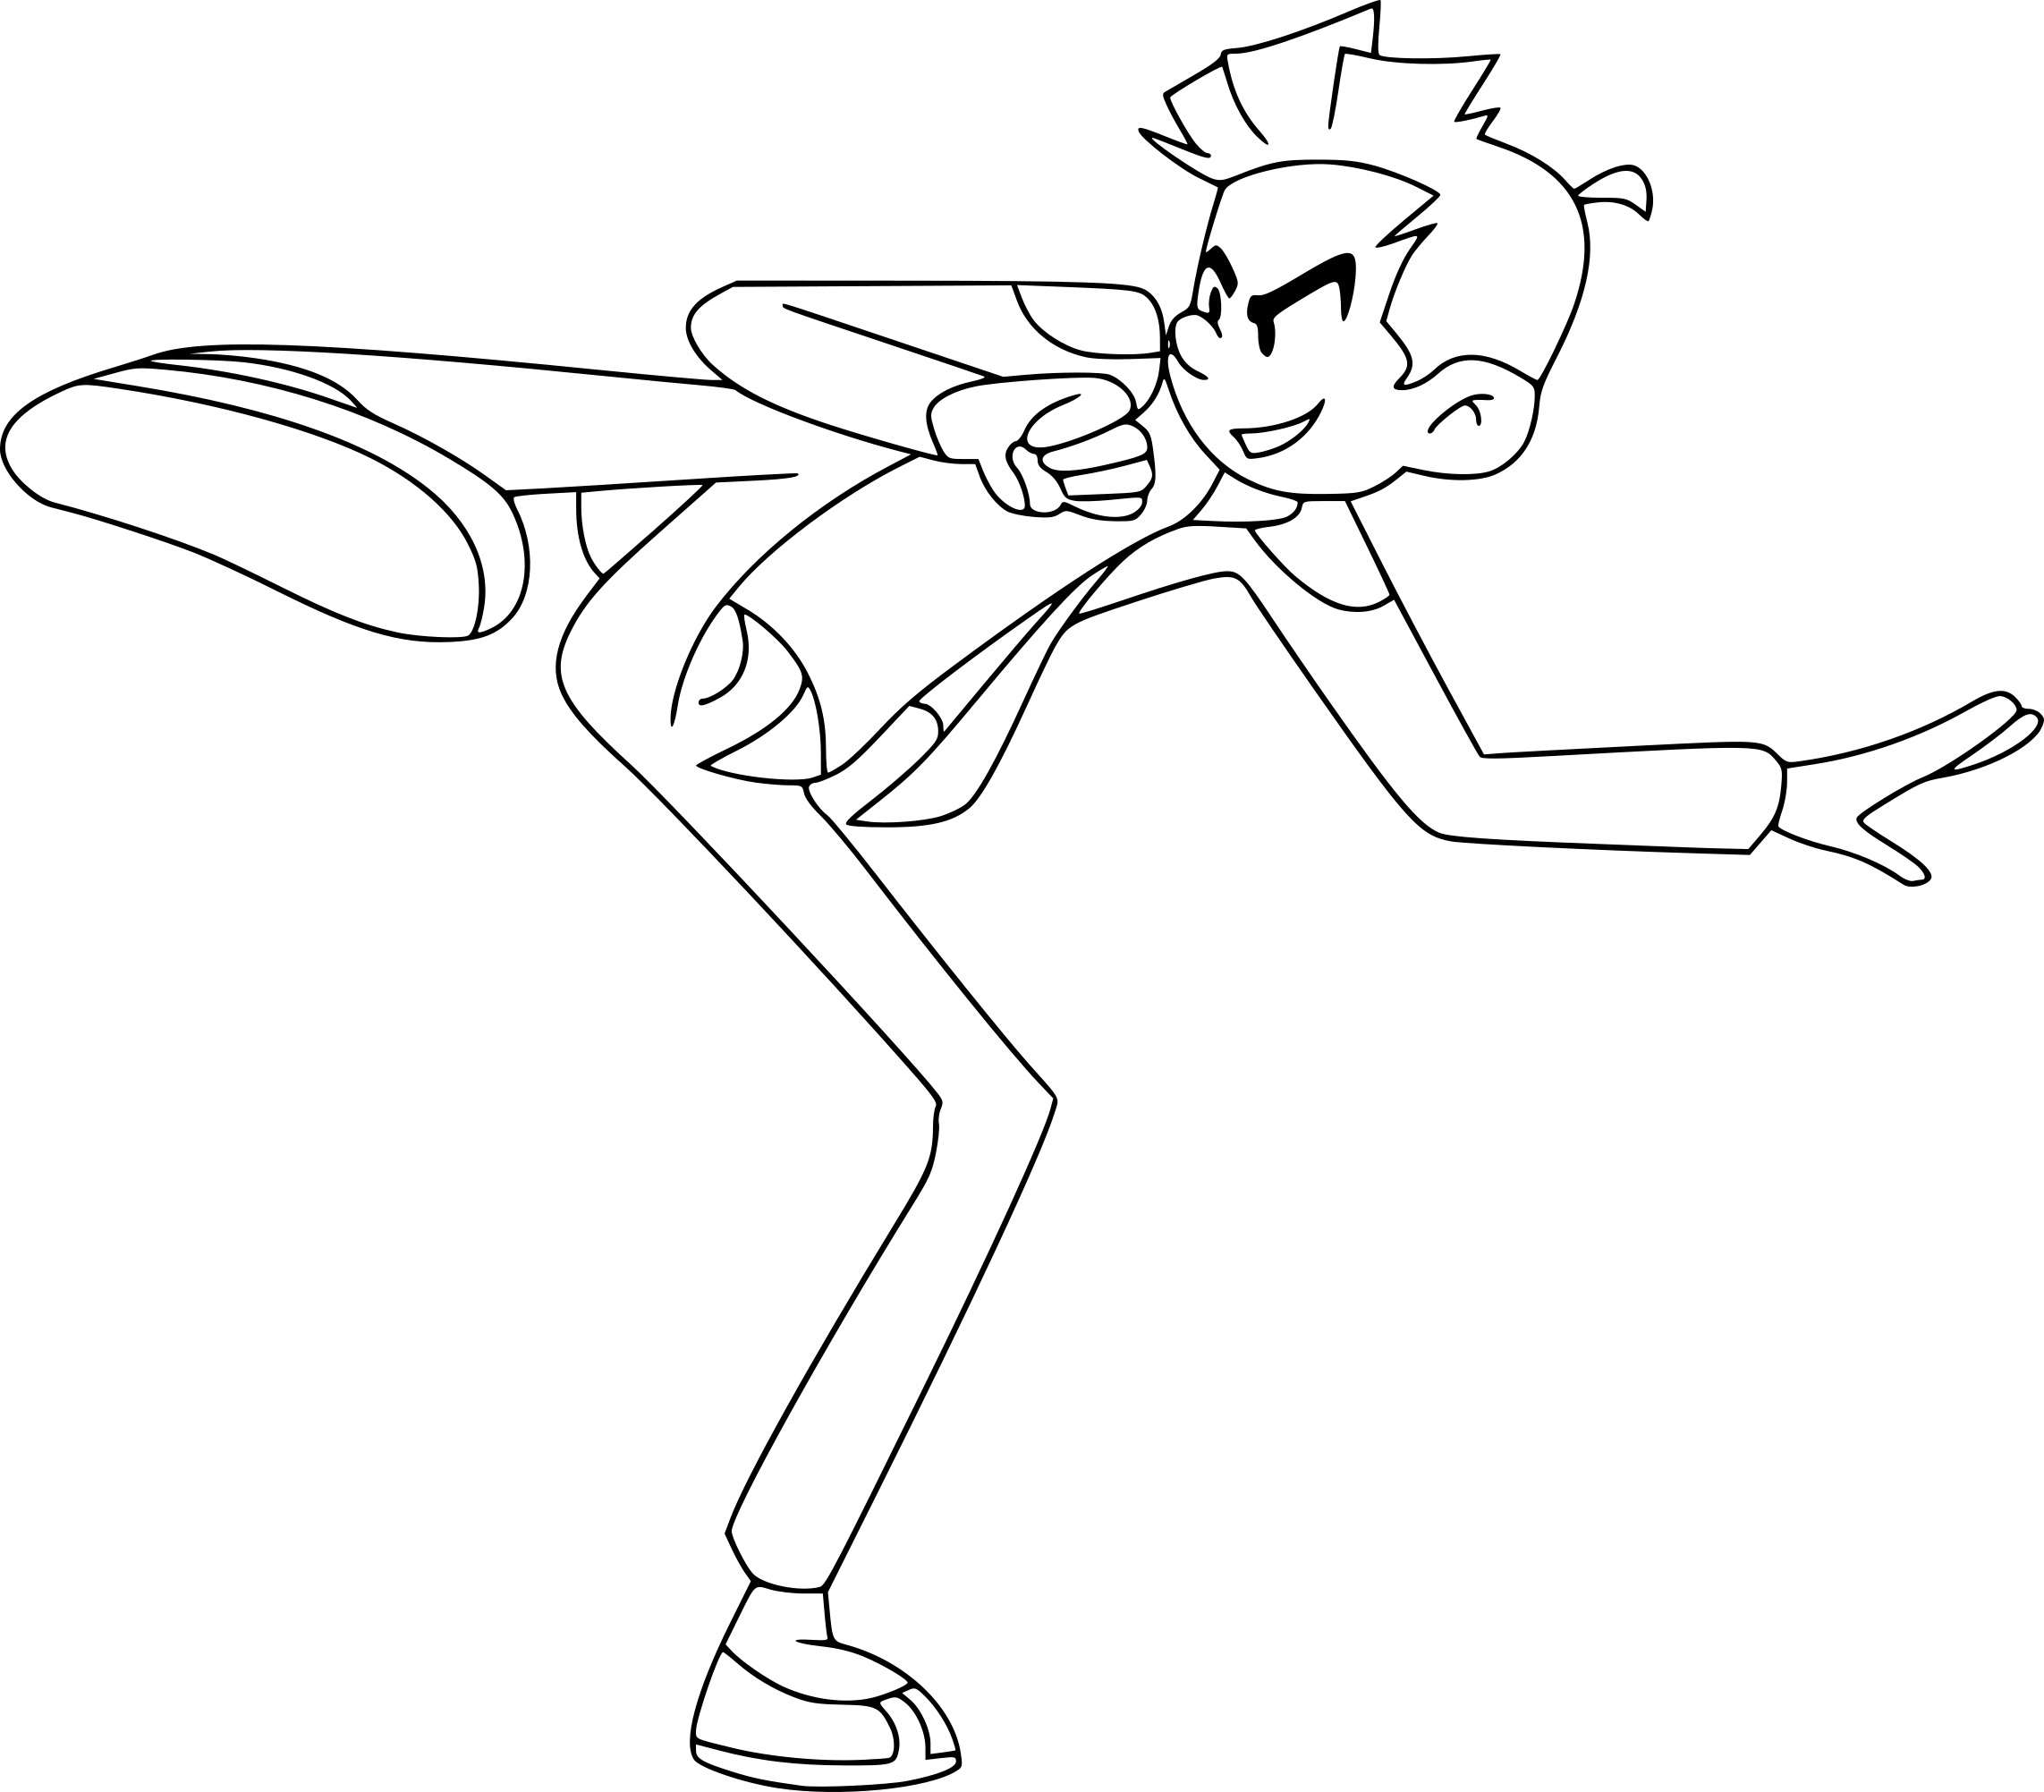 Spirou coloring page